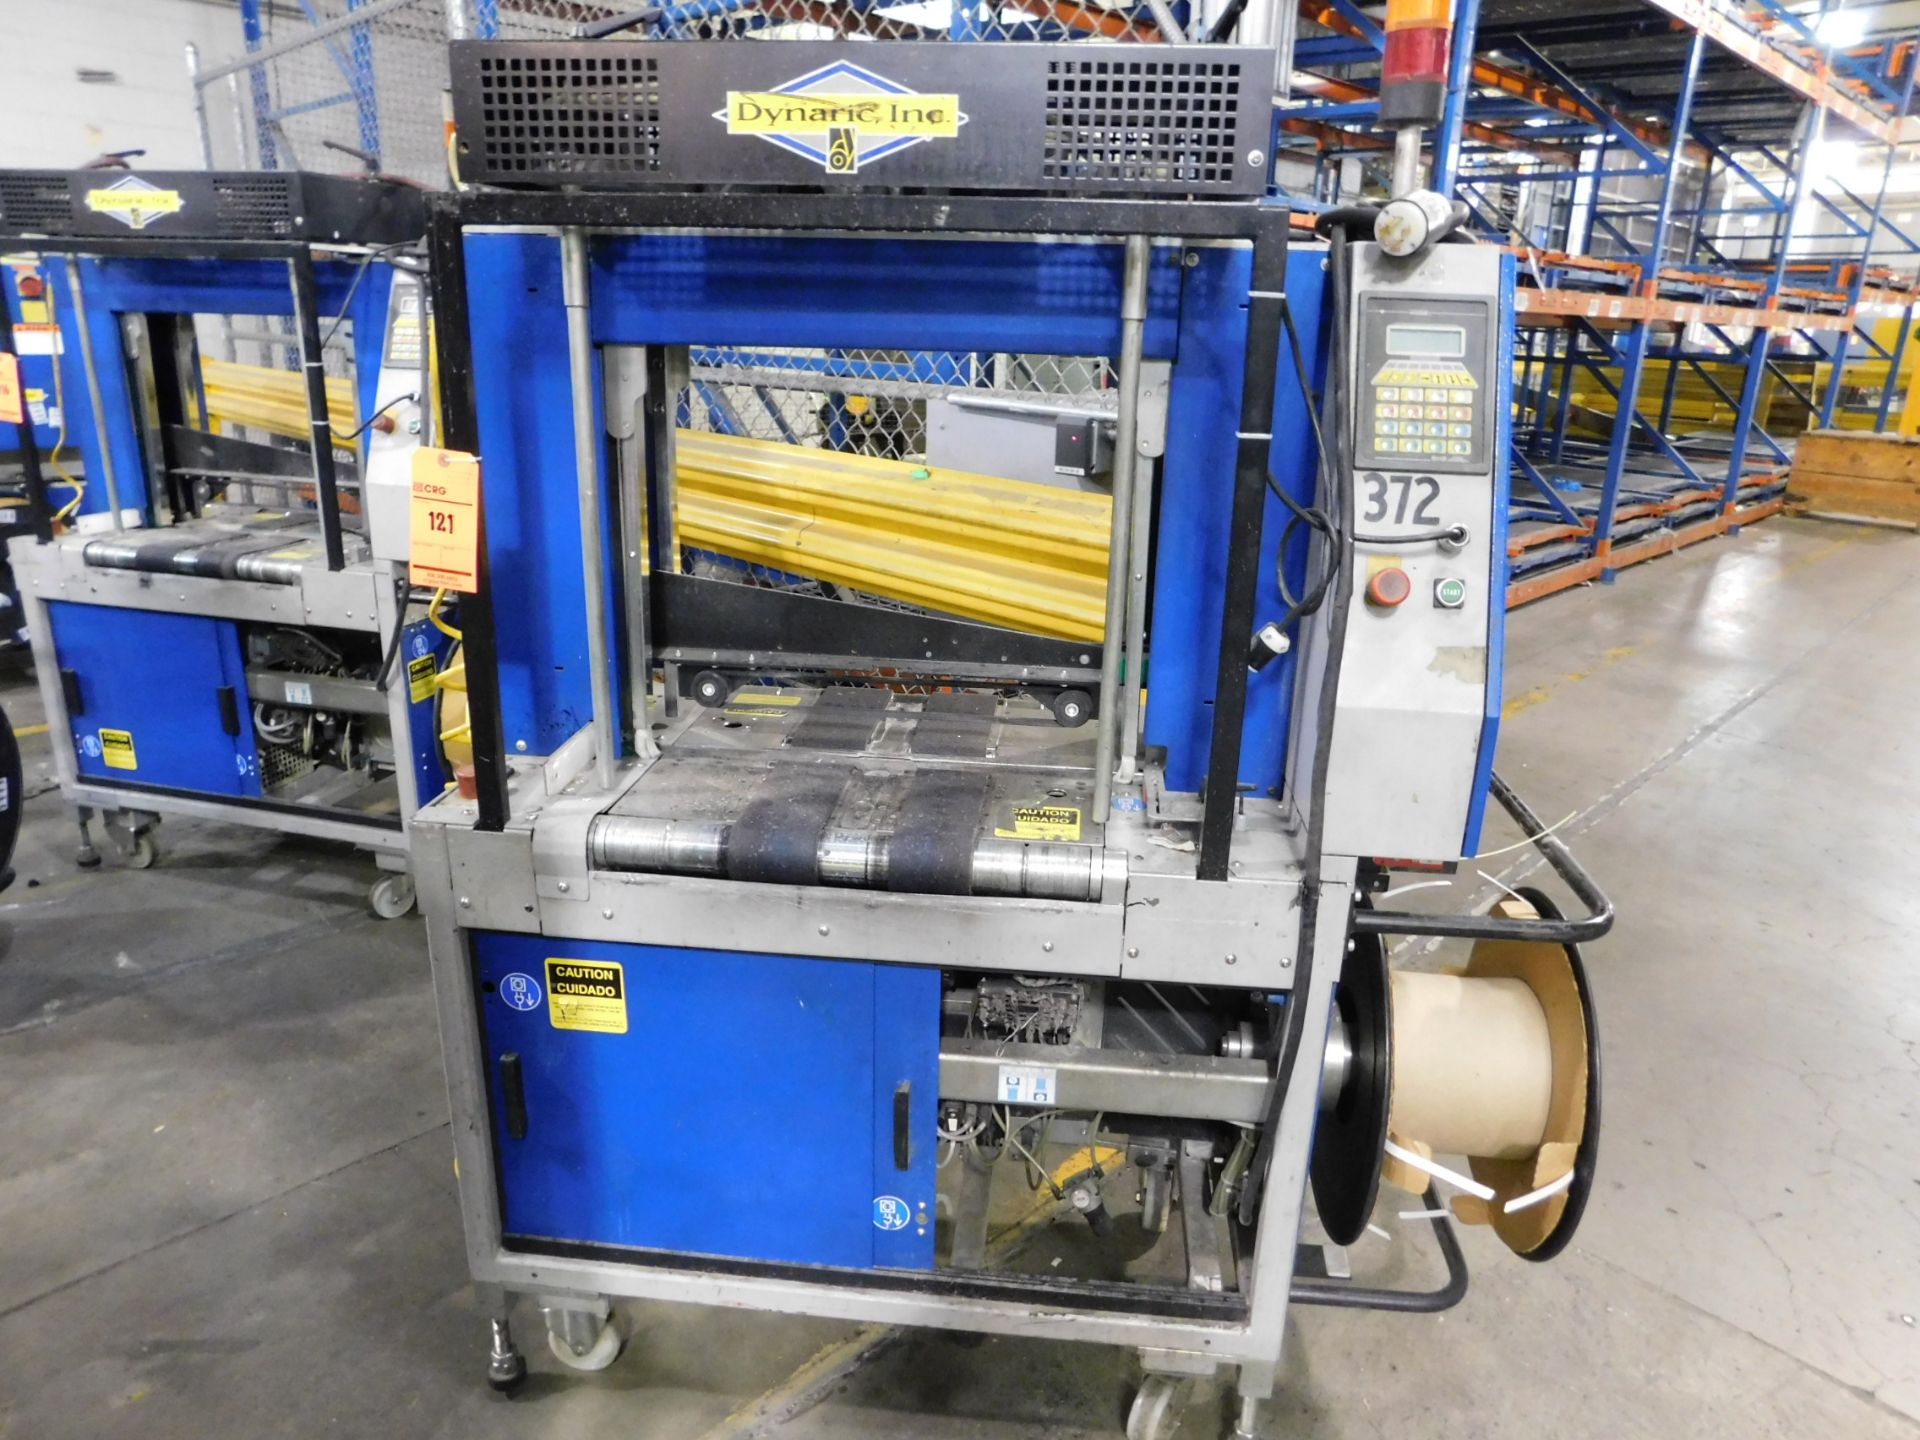 2000 Dynark banding machine with discharge roller conveyor, 5 ft. long by 18 in. wide, asset #